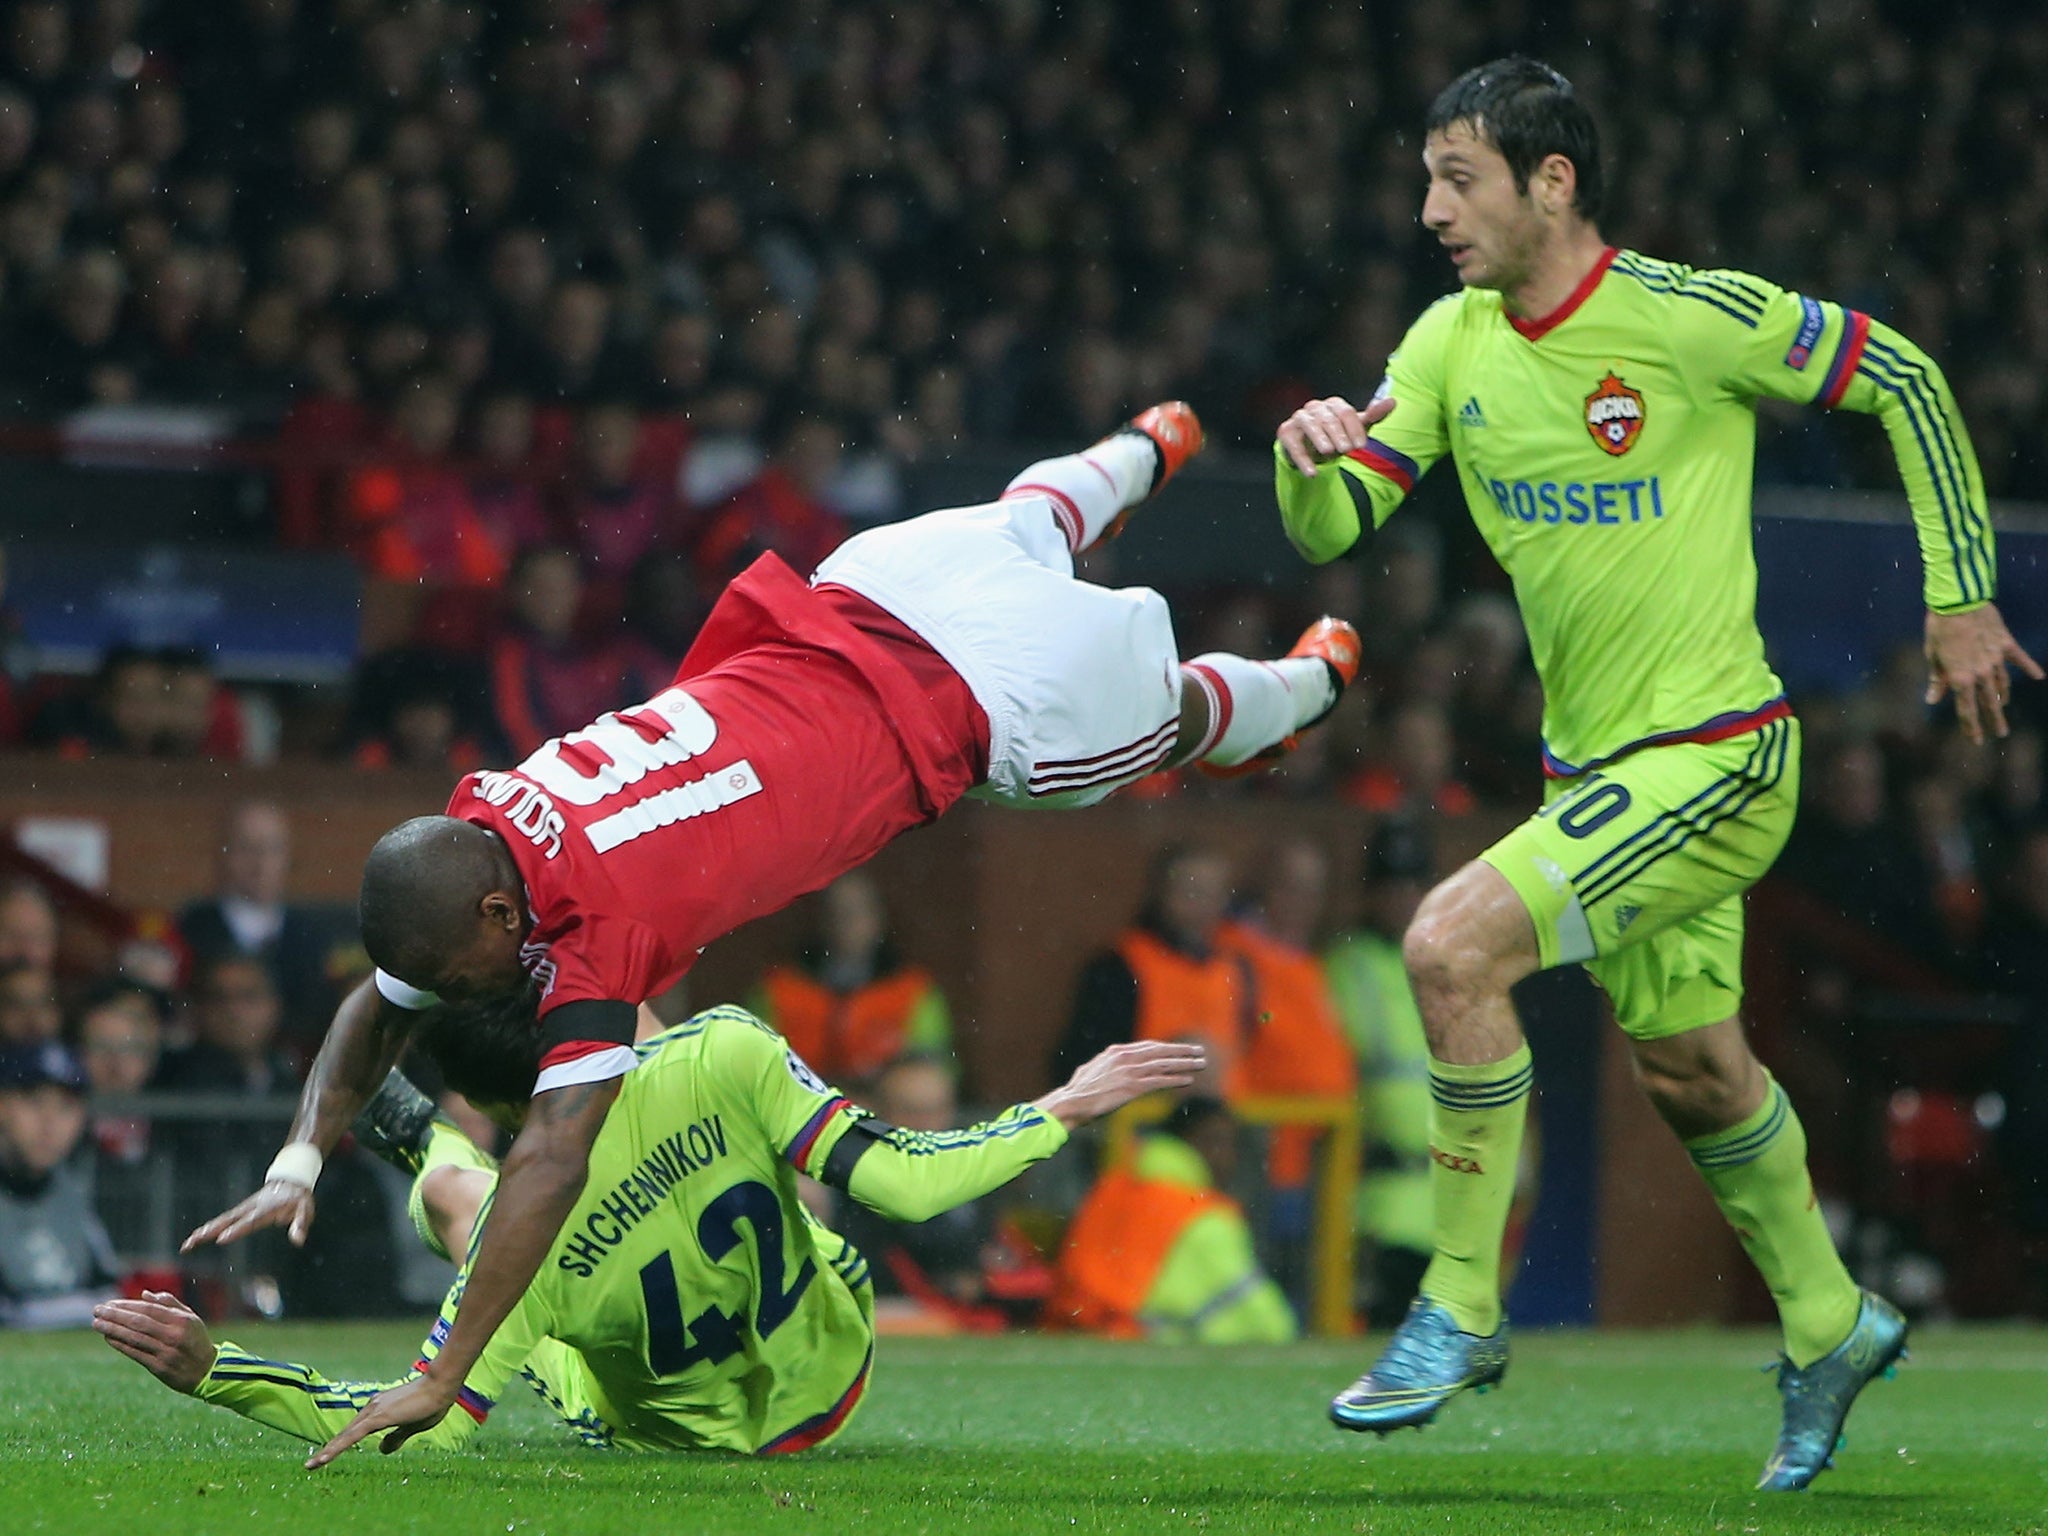 Manchester United winger Ashley Young goes over in a challenge against CSKA Moscow